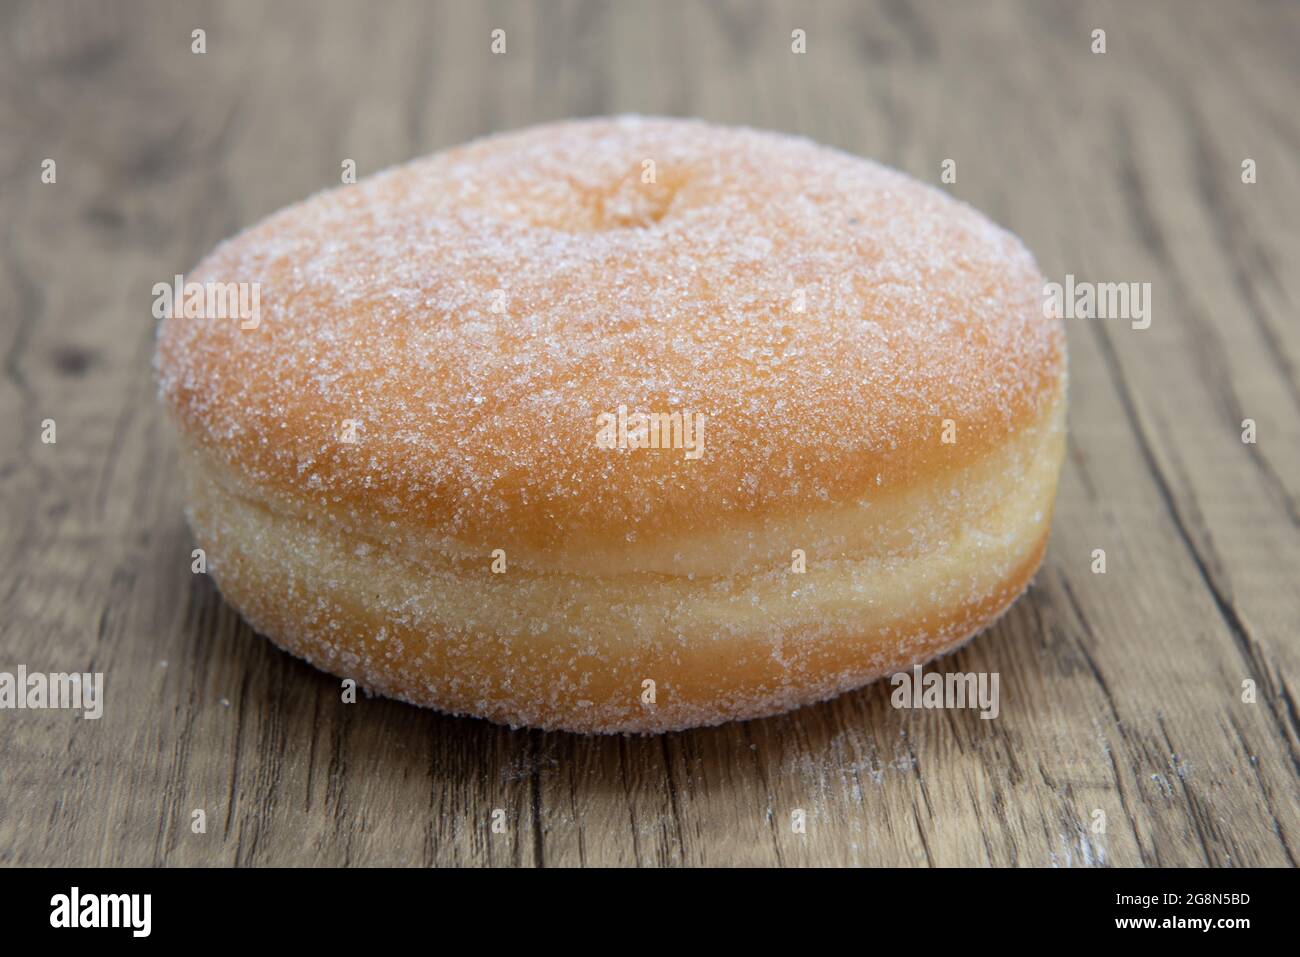 Sugar raised round donut is textured with sugar coating for a sweet treat delight. Stock Photo